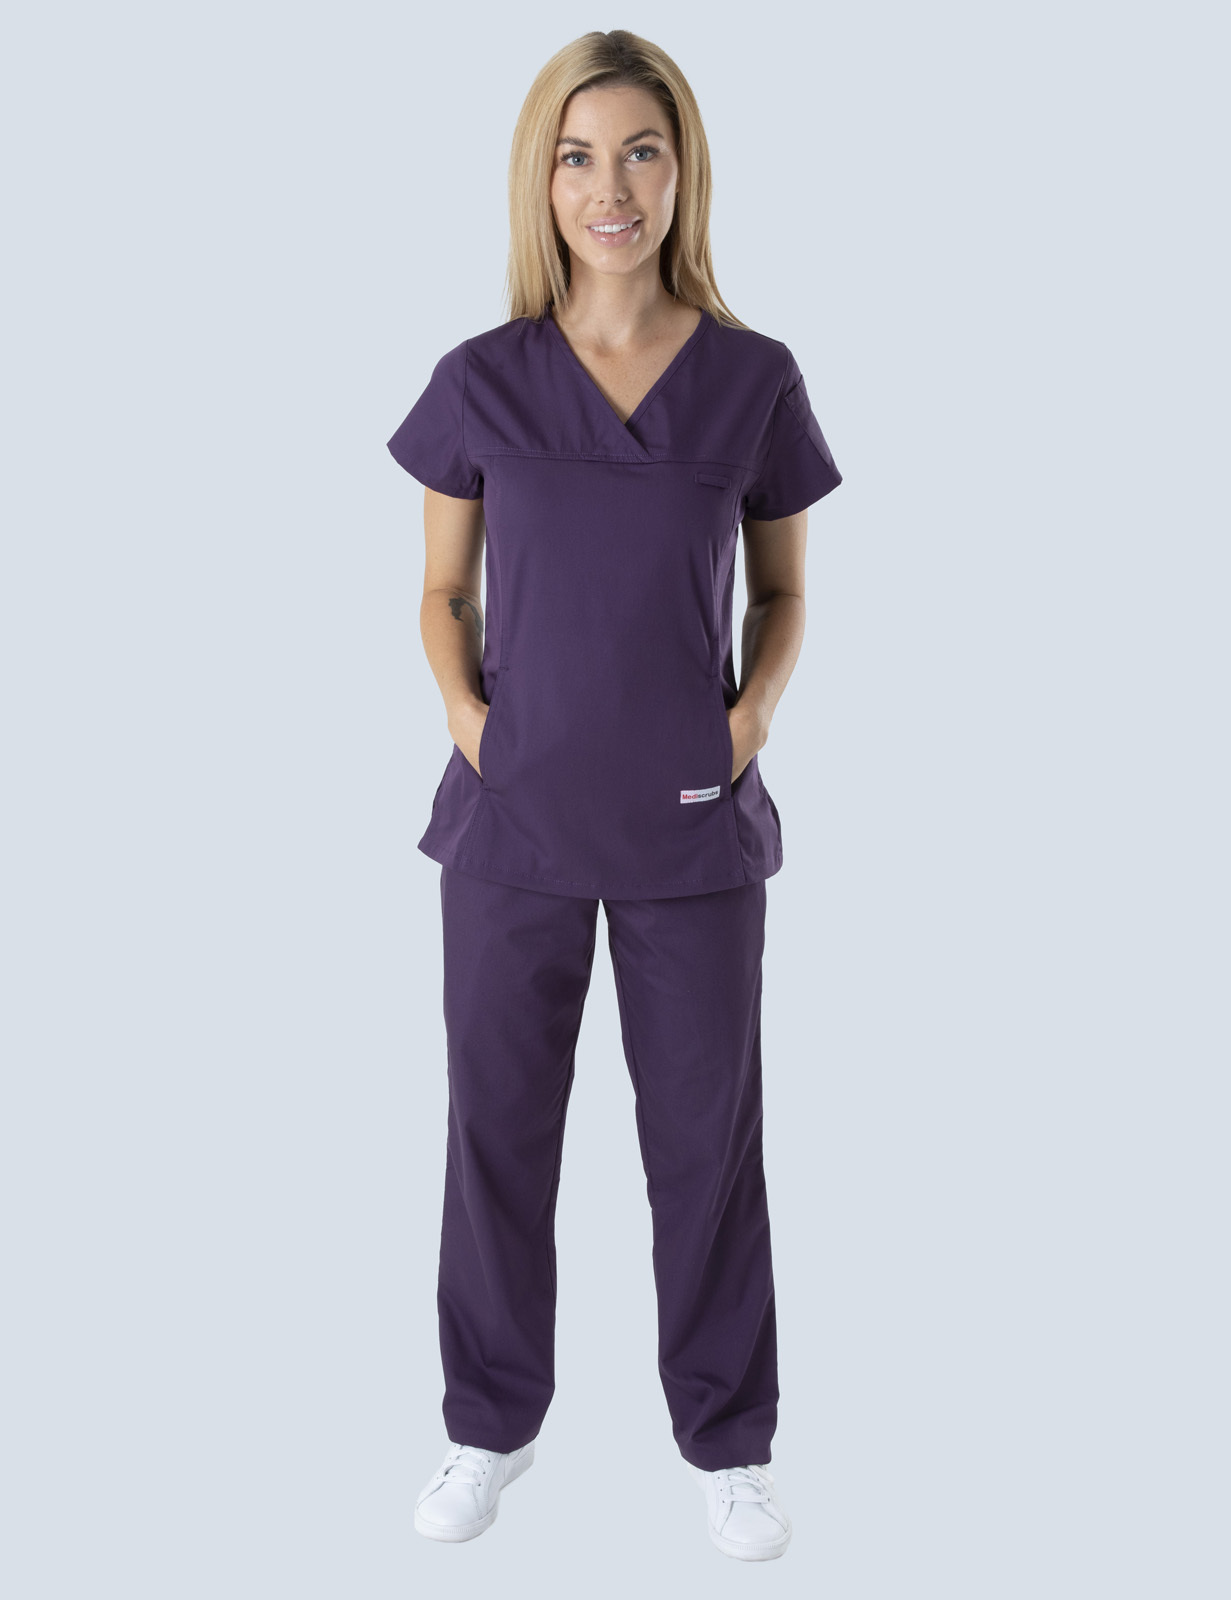 Redland Hospital Special Care Nursery Uniform Set Bundle (Women's Fit Solid Top and Cargo Pants in Aubergine incl Logo) 